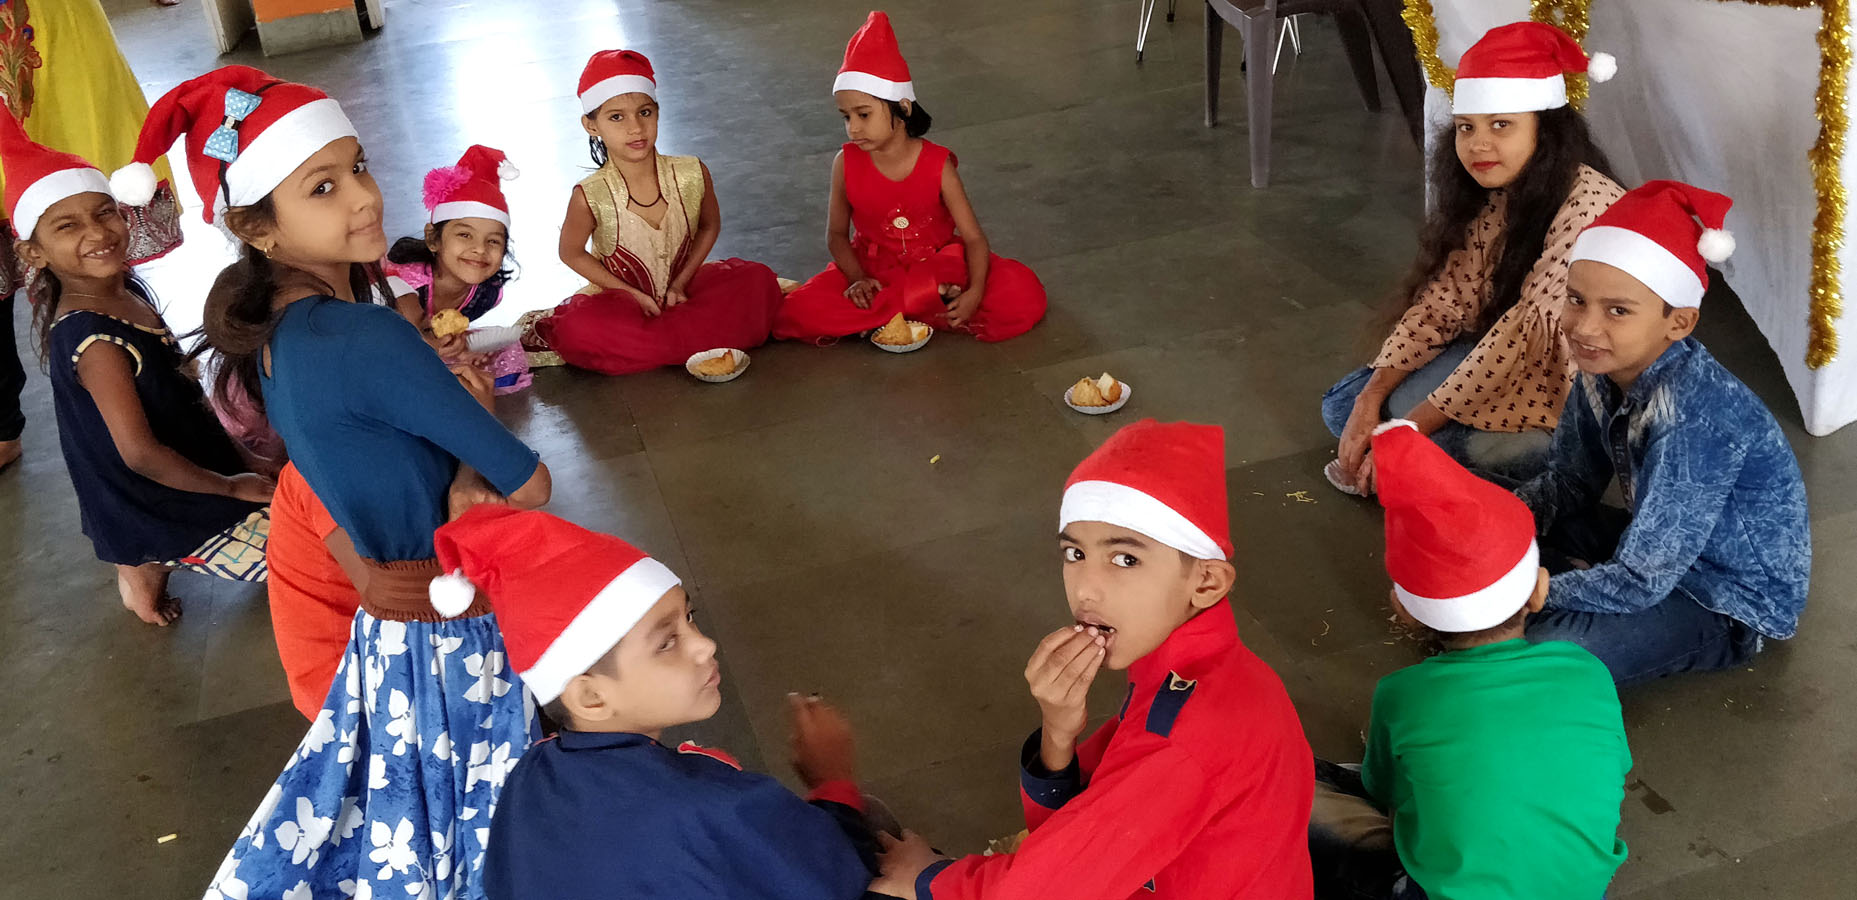 Cute little children in santa caps munching away on samosas and other snacks in the party